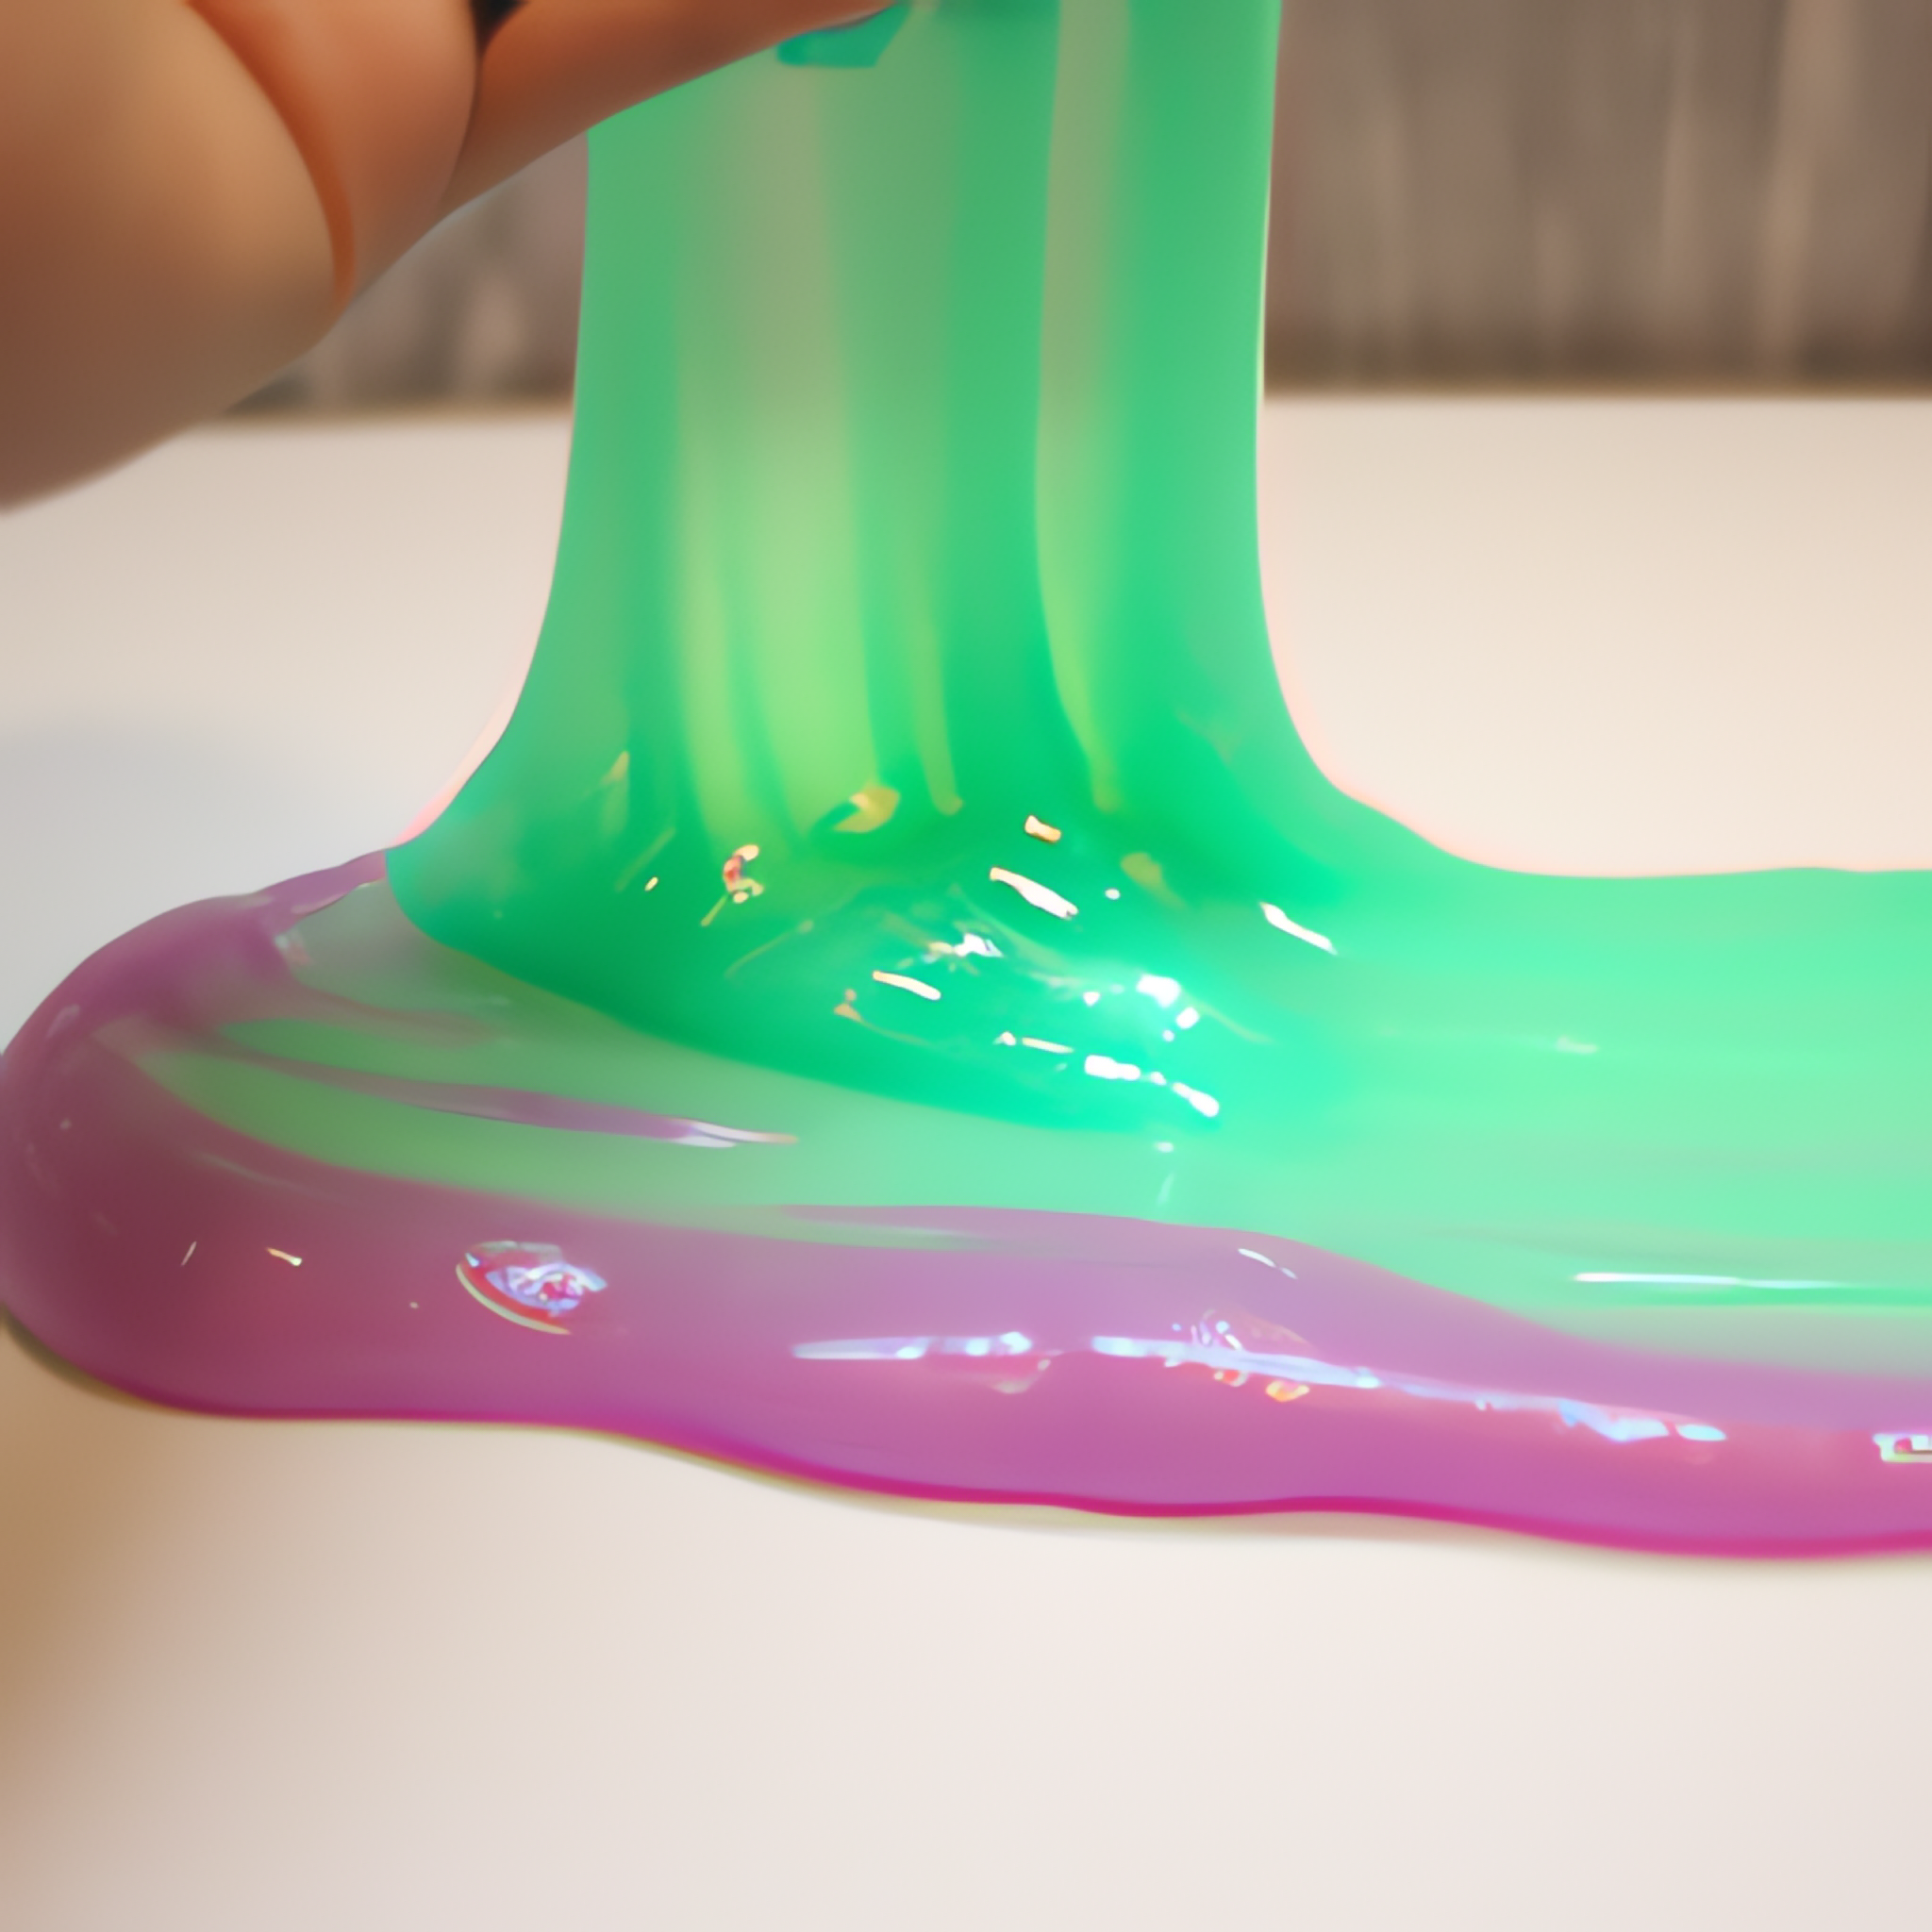 The Best Cleaning Slime Recipe  A Fun Way to Clean • Start with the Bed